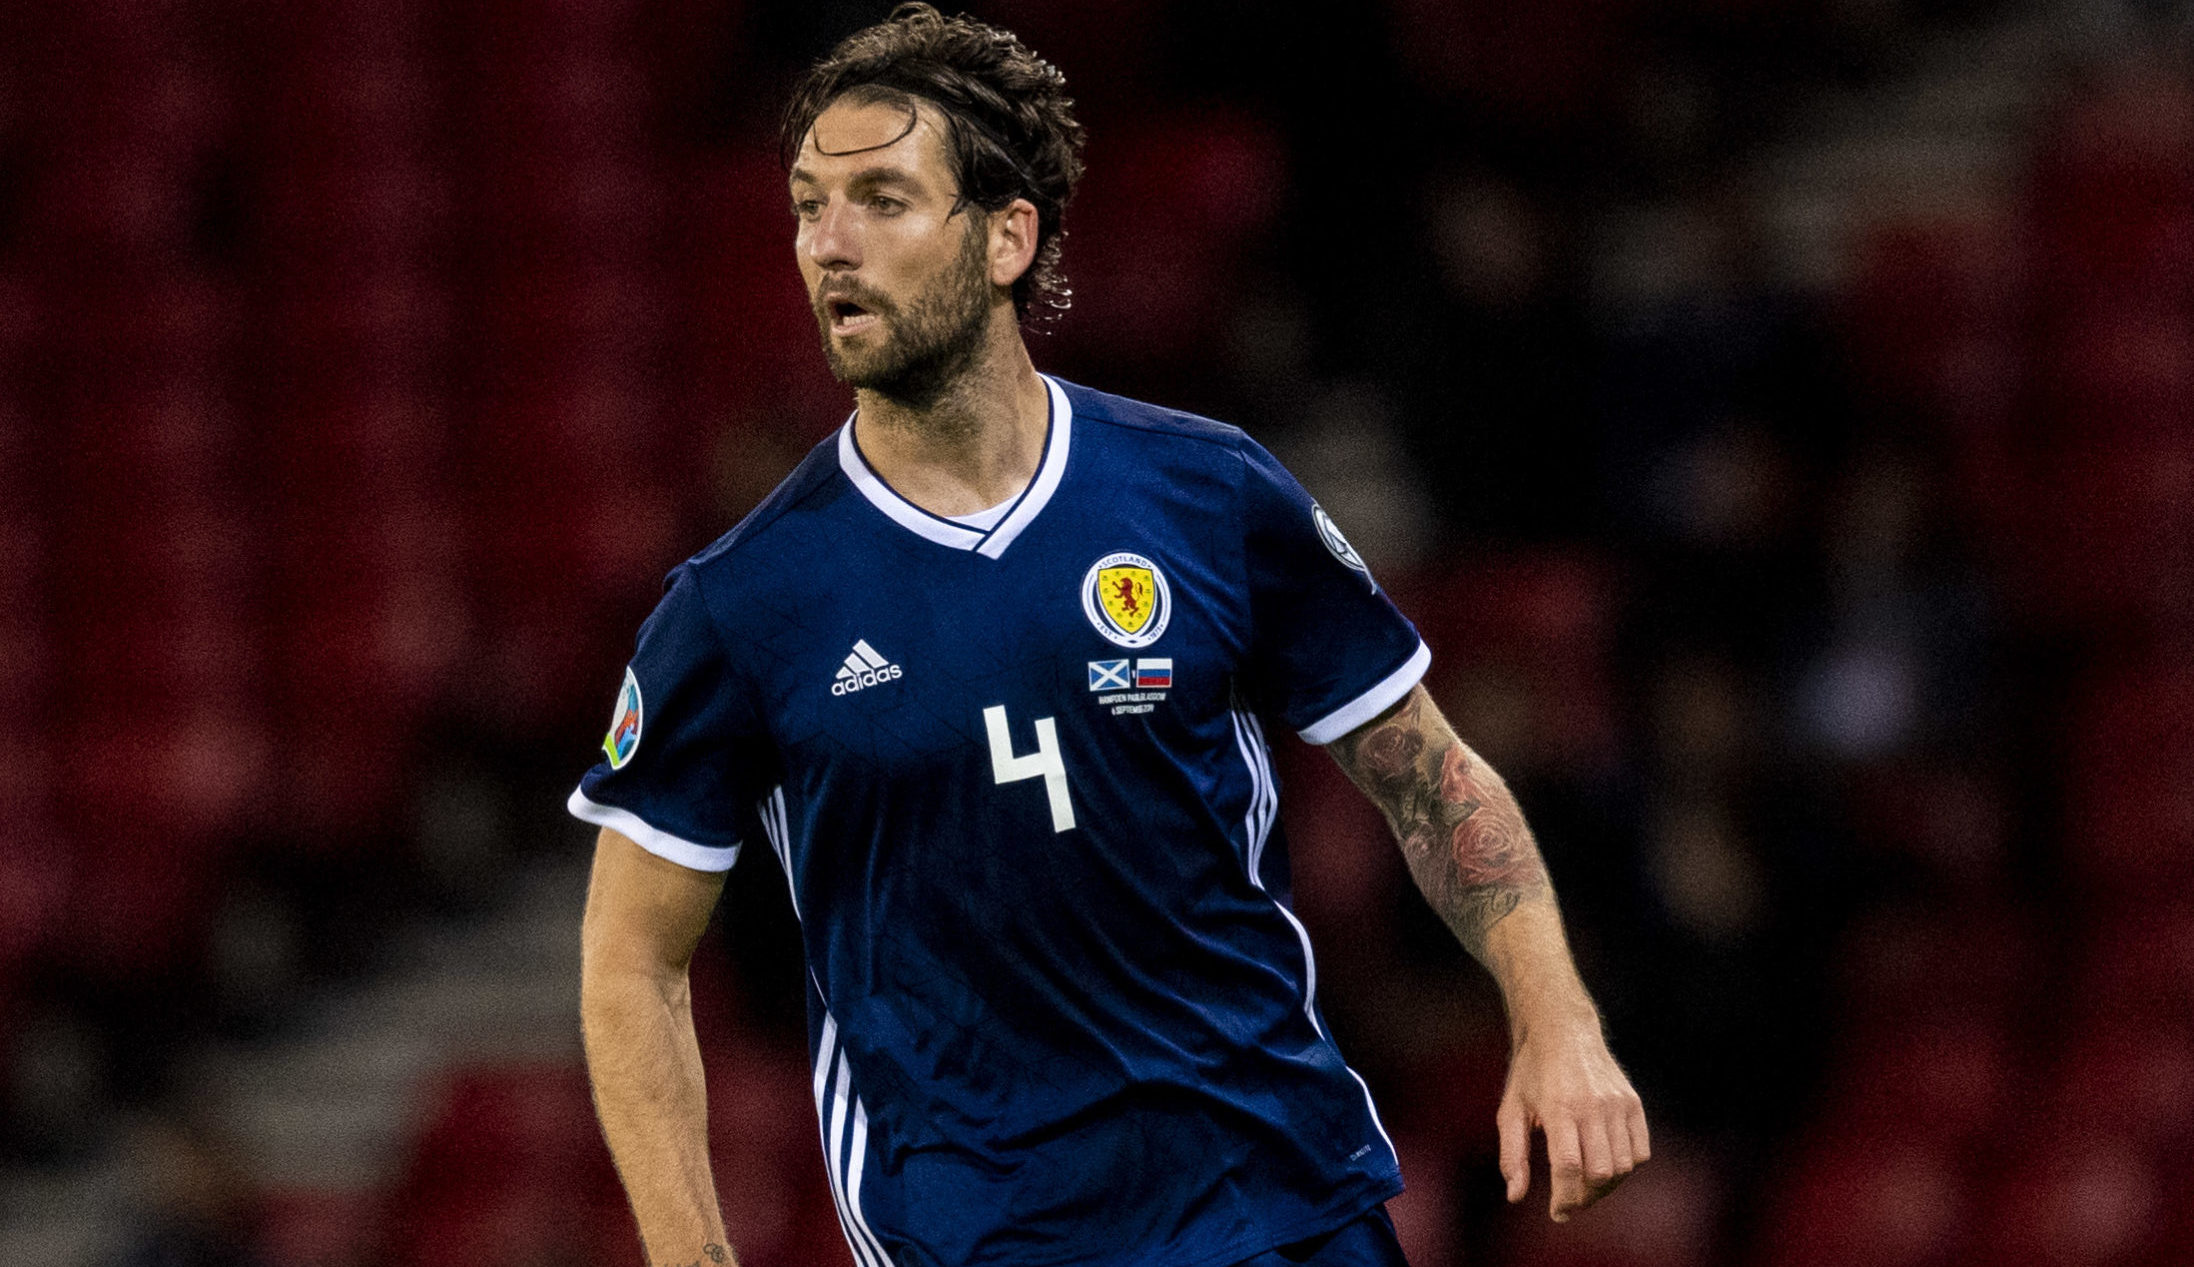 Charlie Mulgrew has been impressed by Steve Clarke since he became Scotland manager